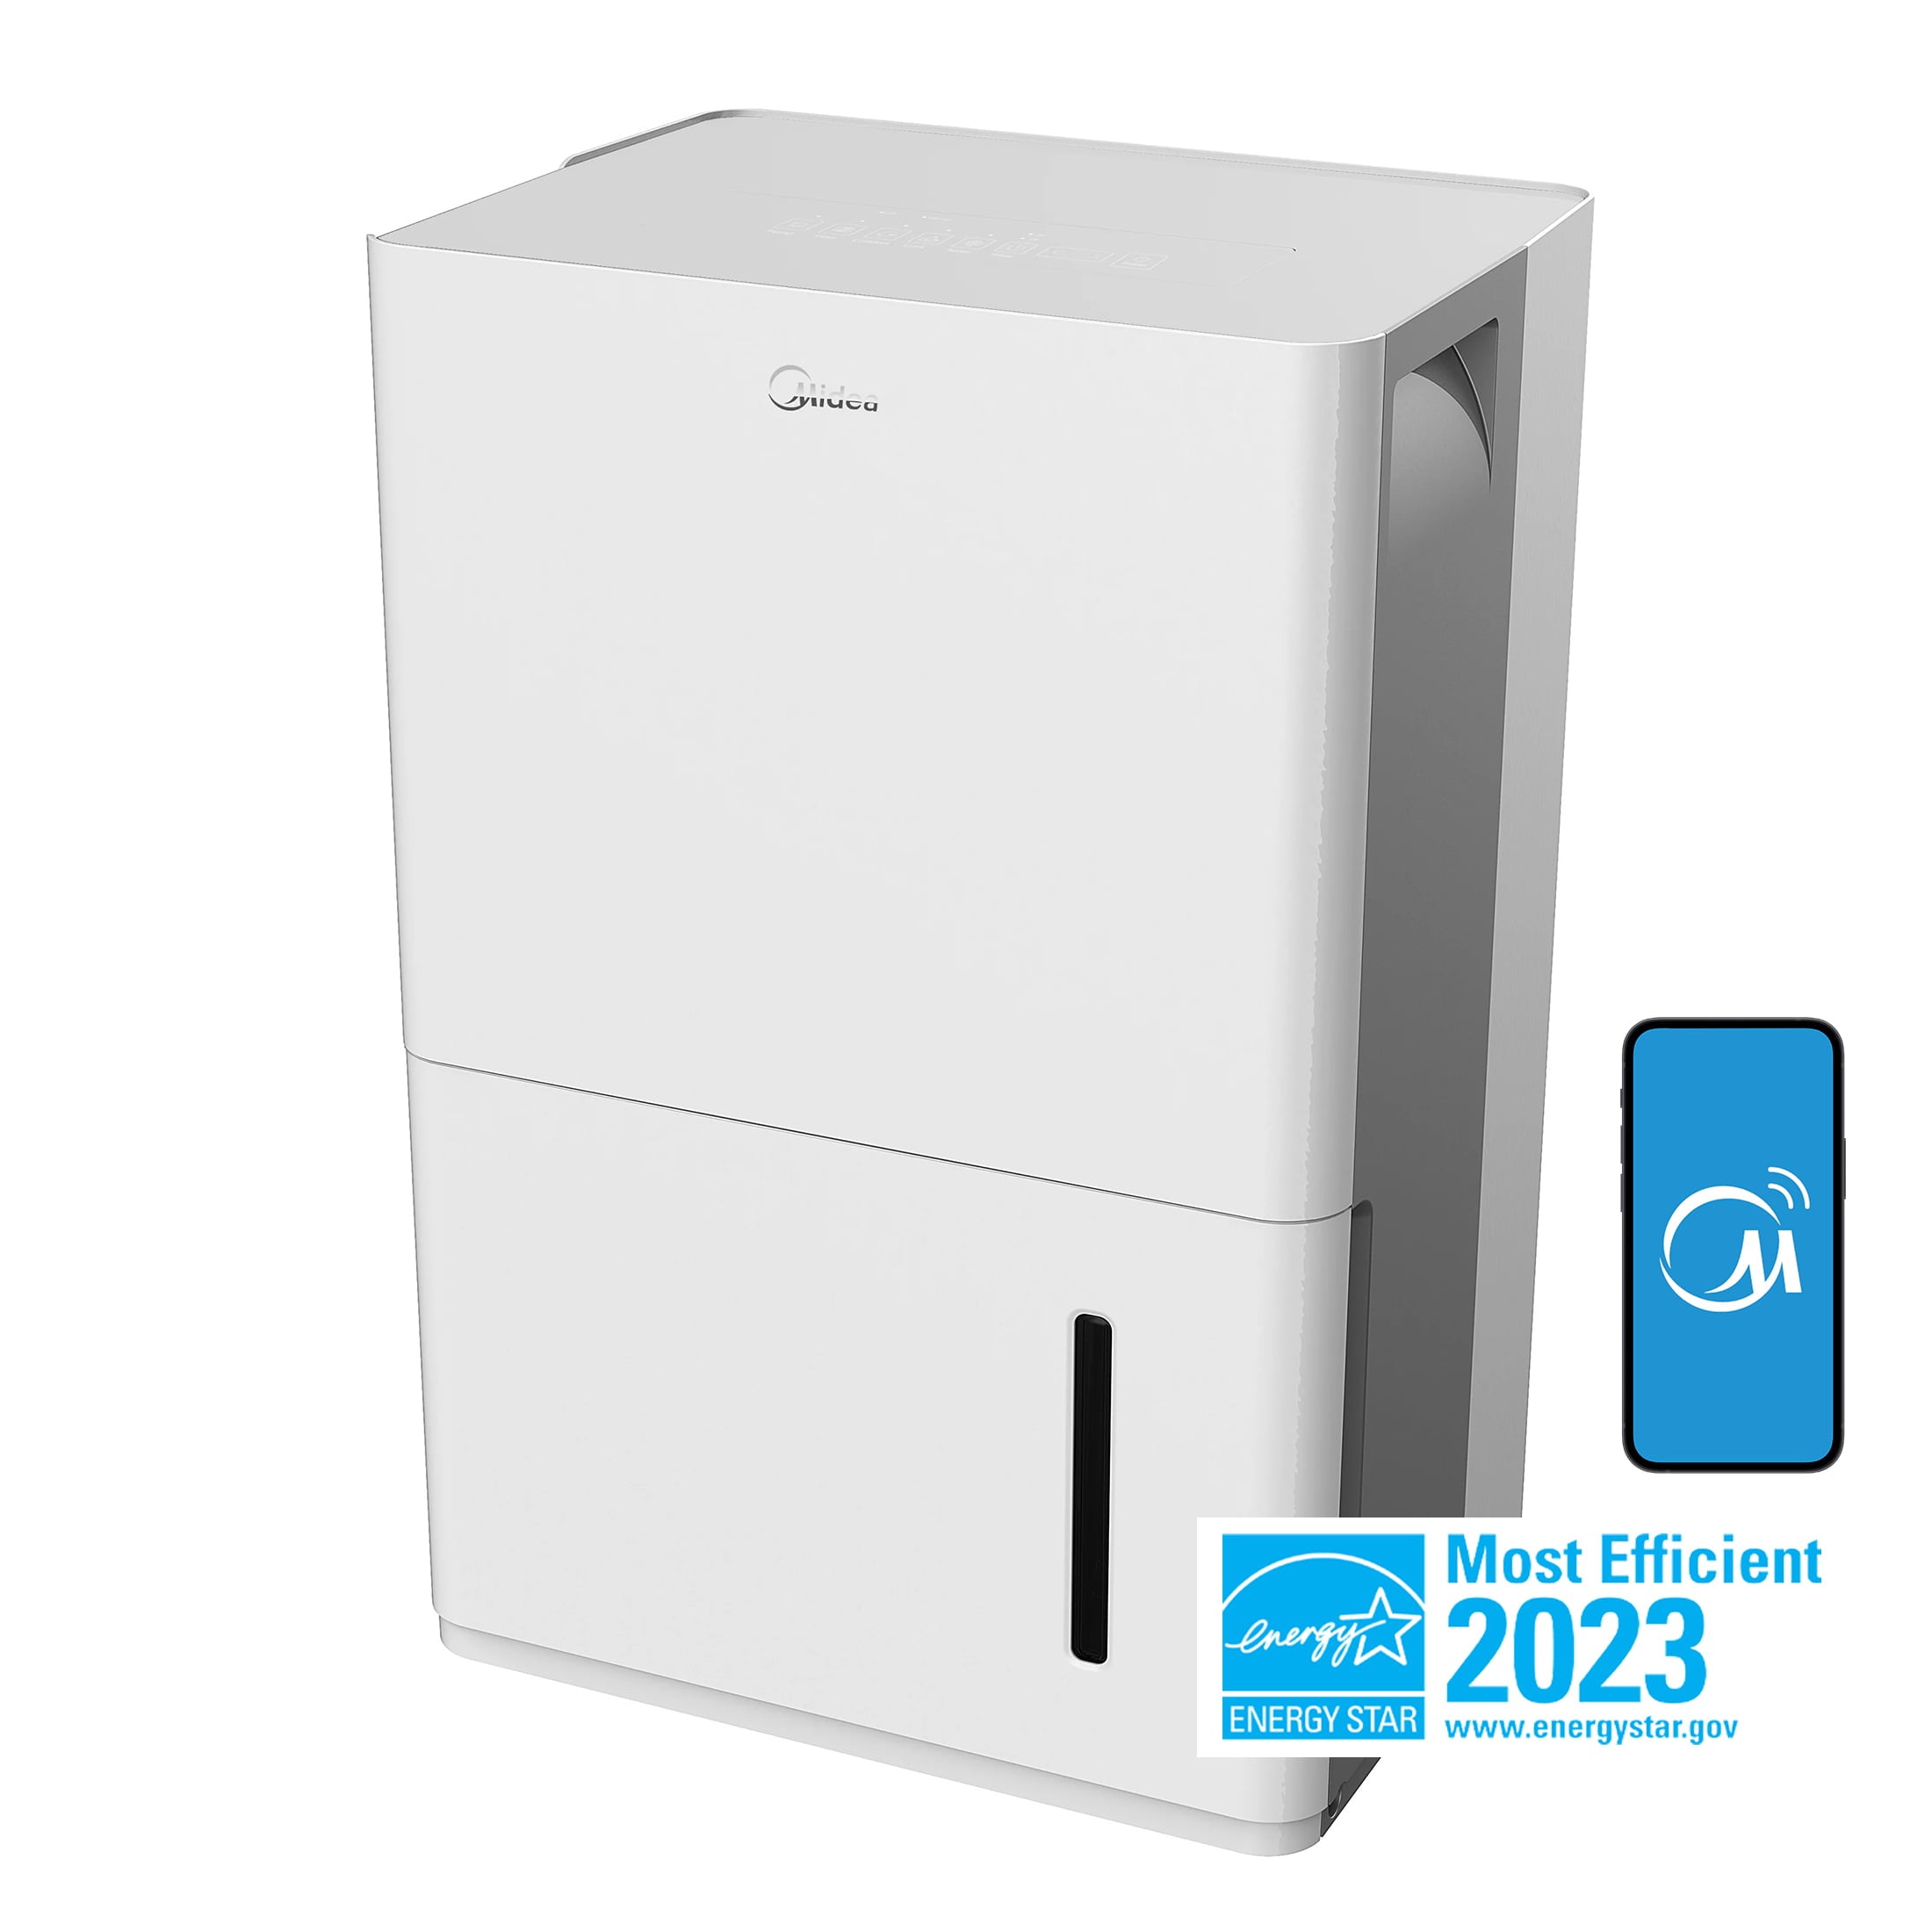 Restored Midea 35-Pint Energy Star Smart Dehumidifier for Very Damp Rooms, White, MAD35S1WWT (Factory Refurbished)